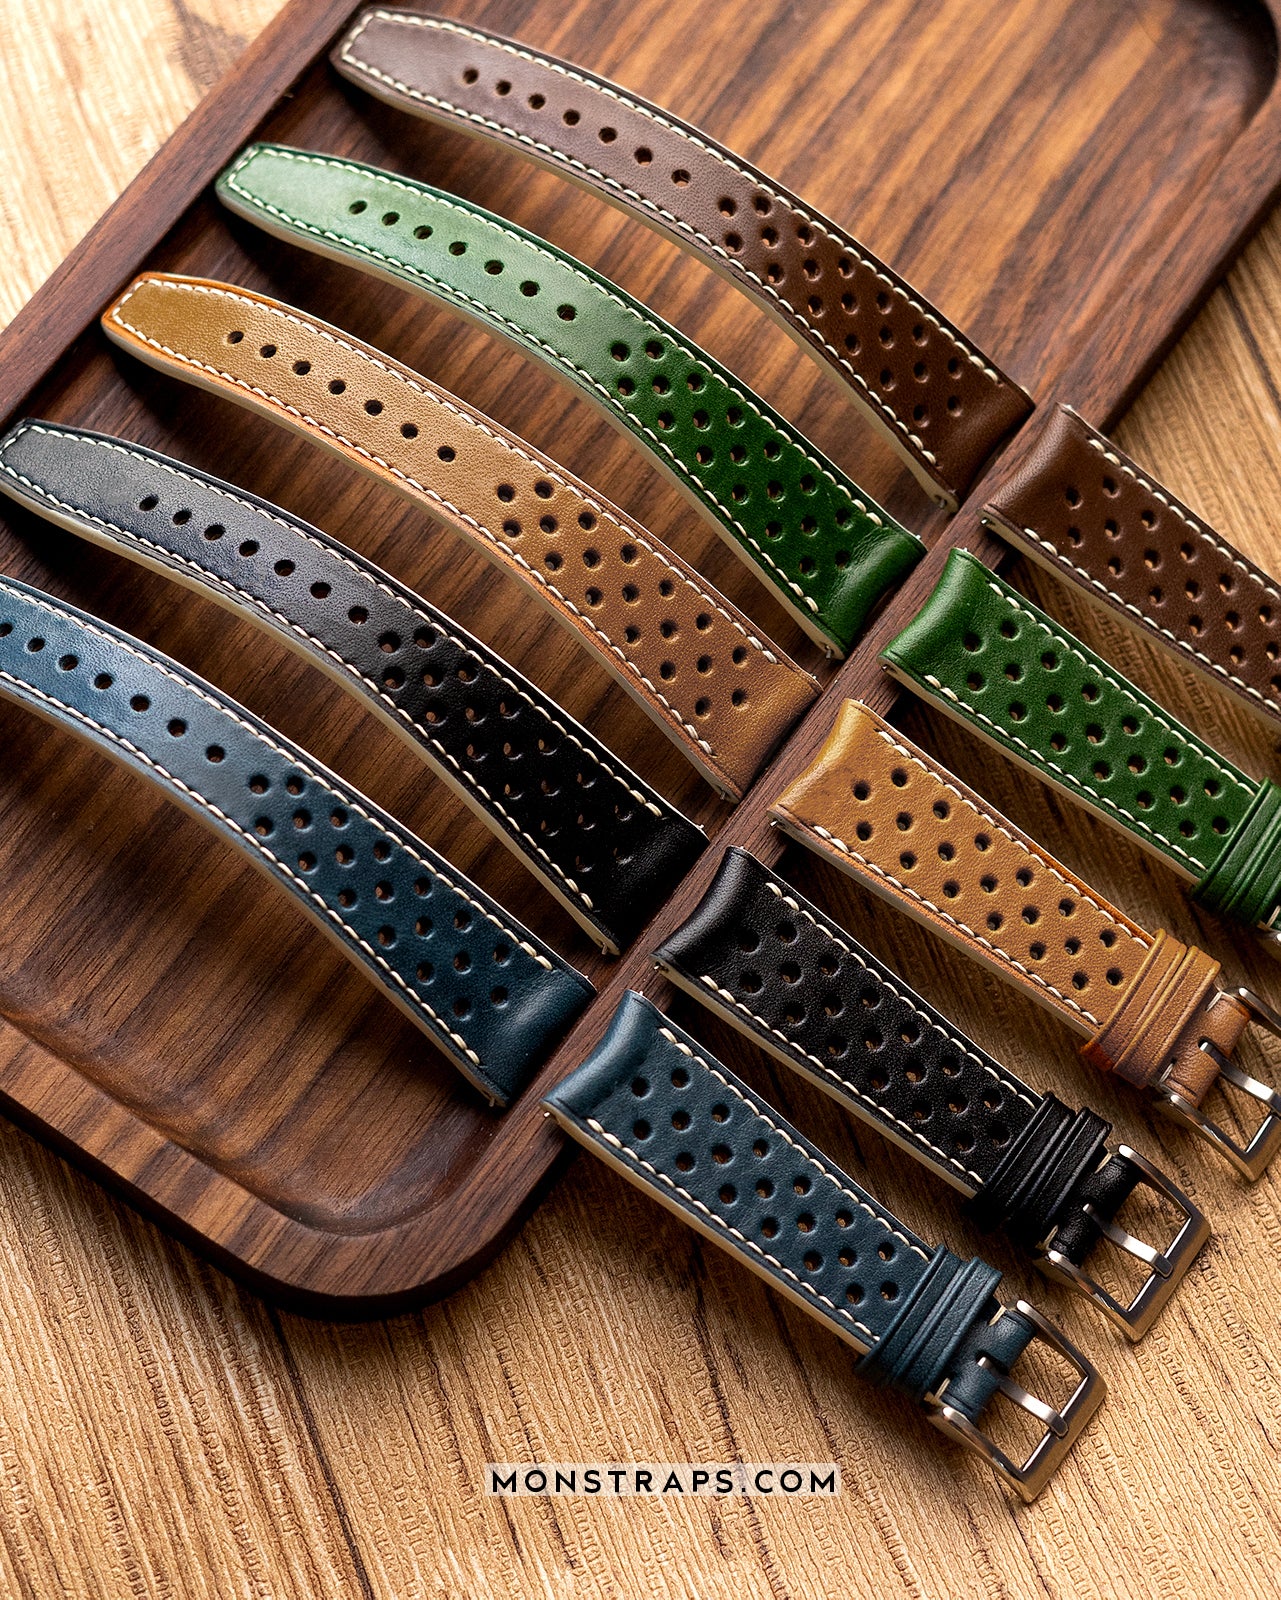 Racing Watch Straps Made By Hand